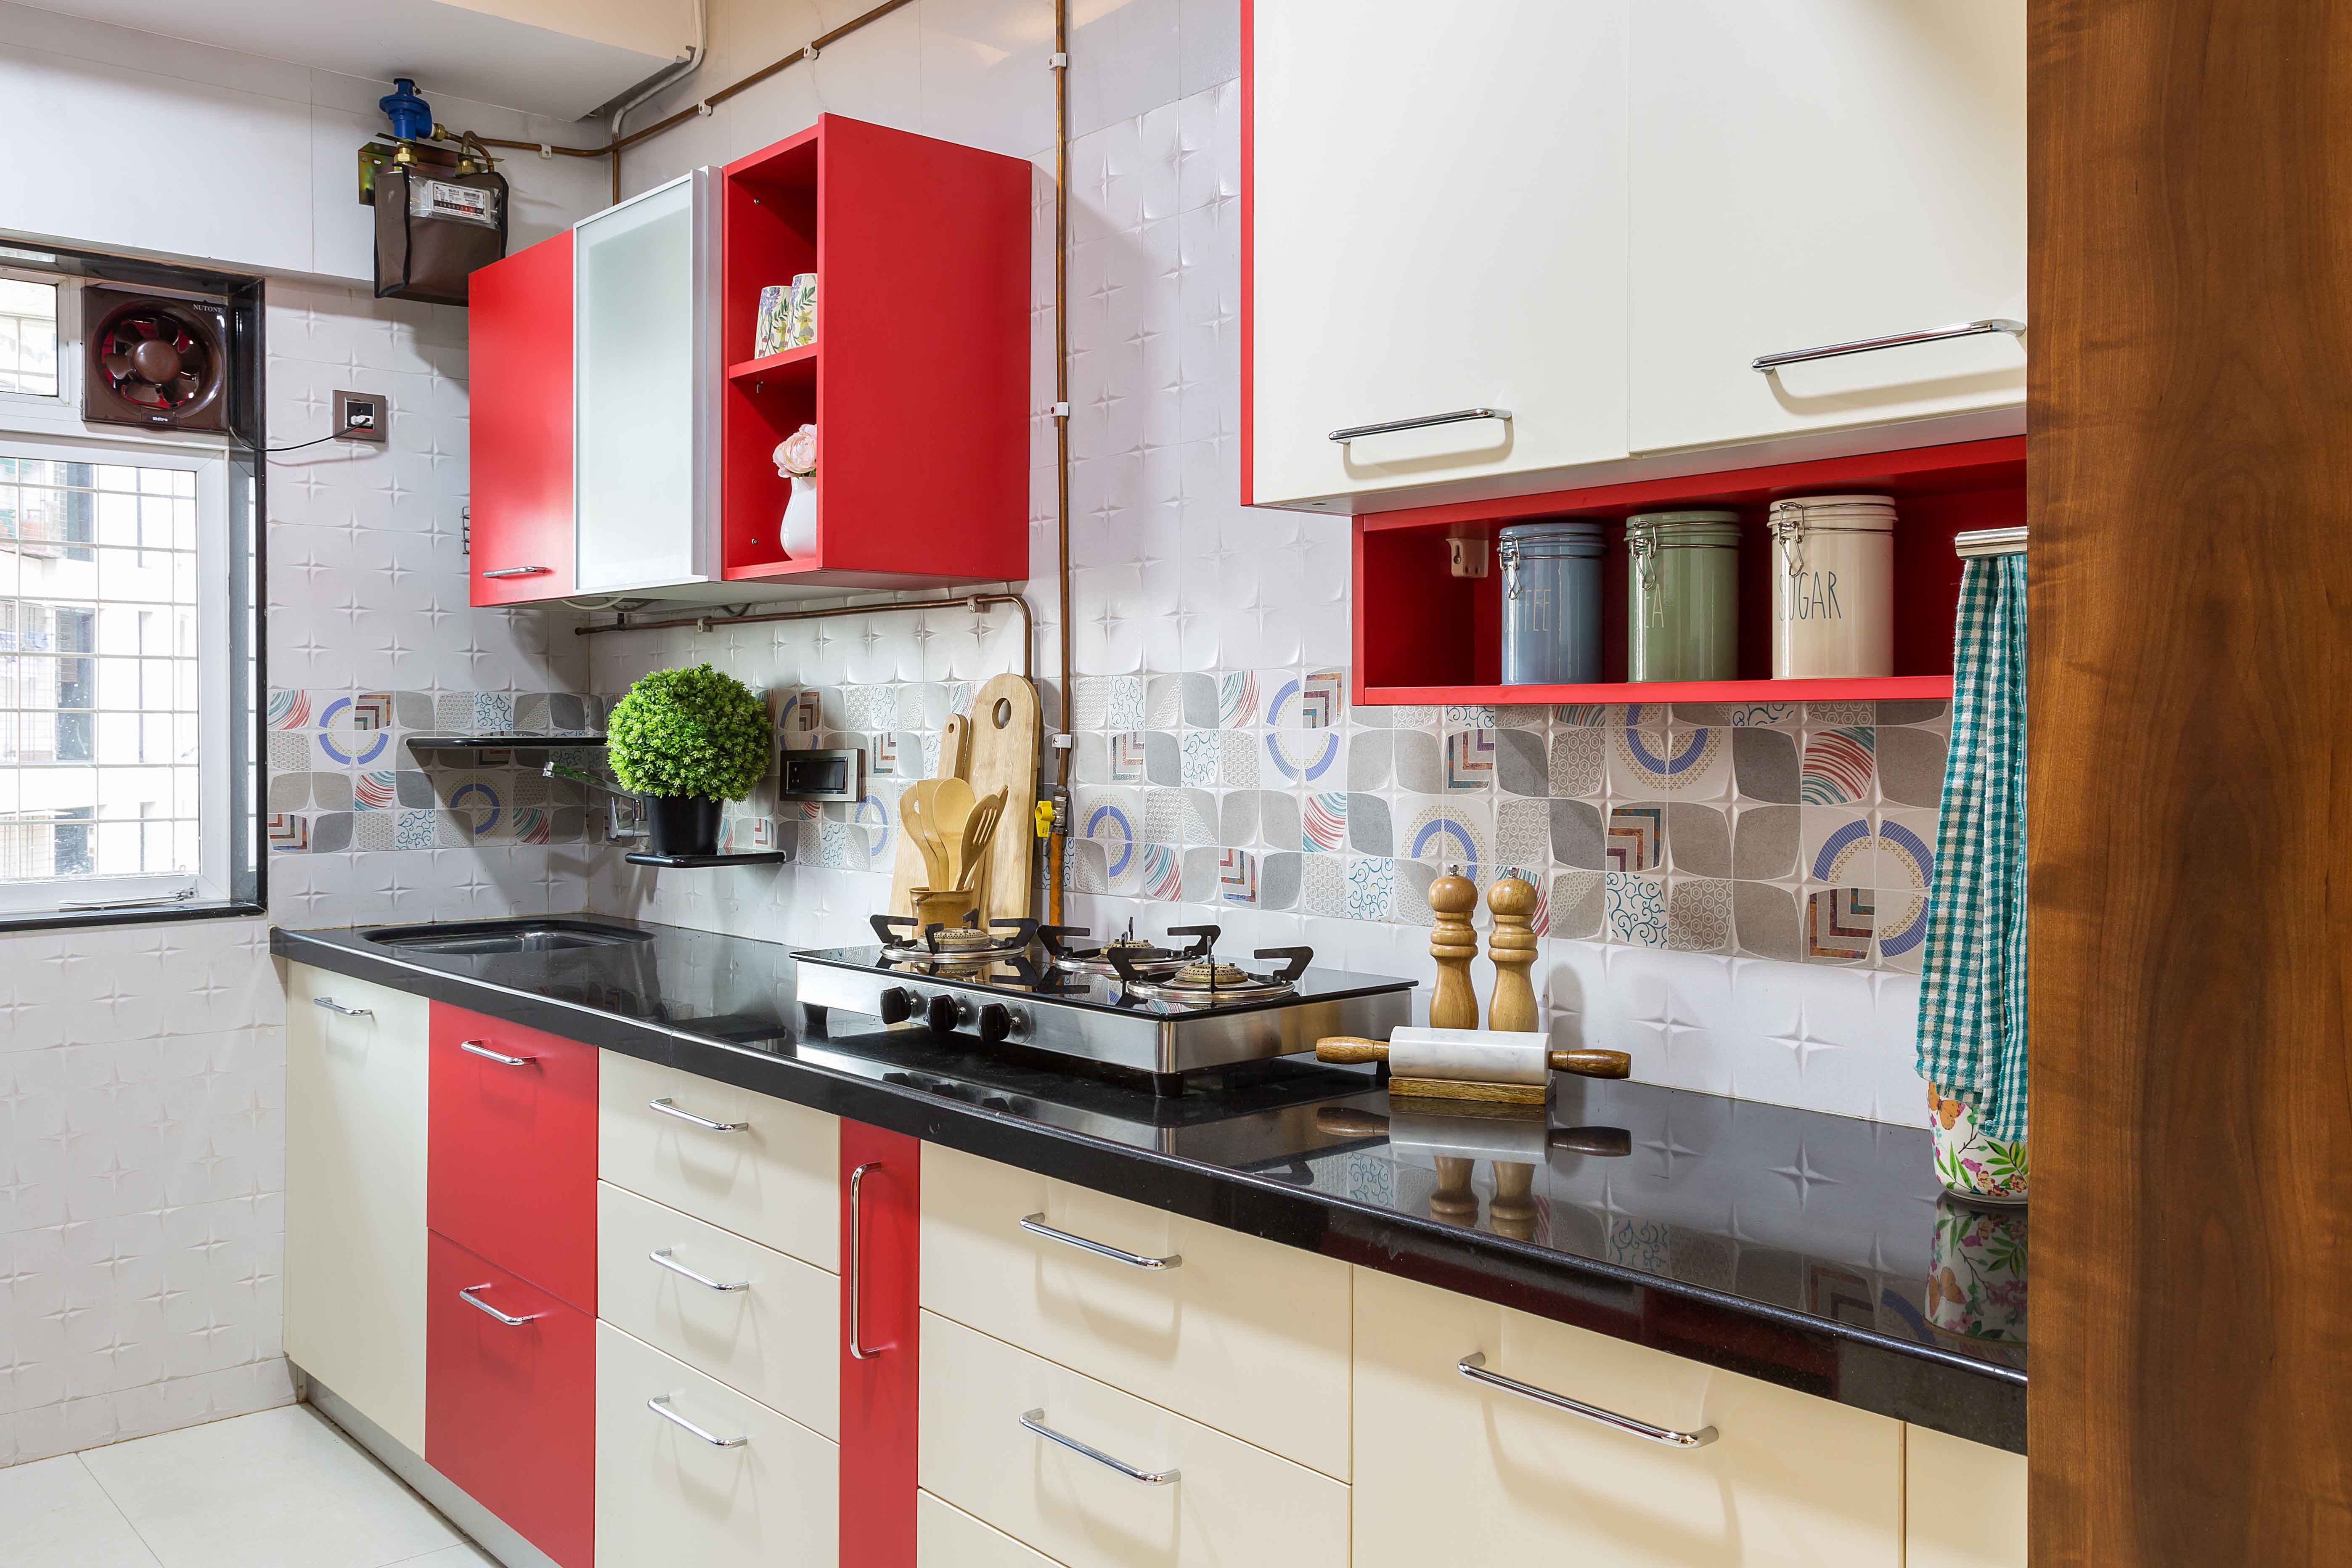 Contemporary 3-BHK Flat In Mumbai With Red And White Straight Kitchen Design